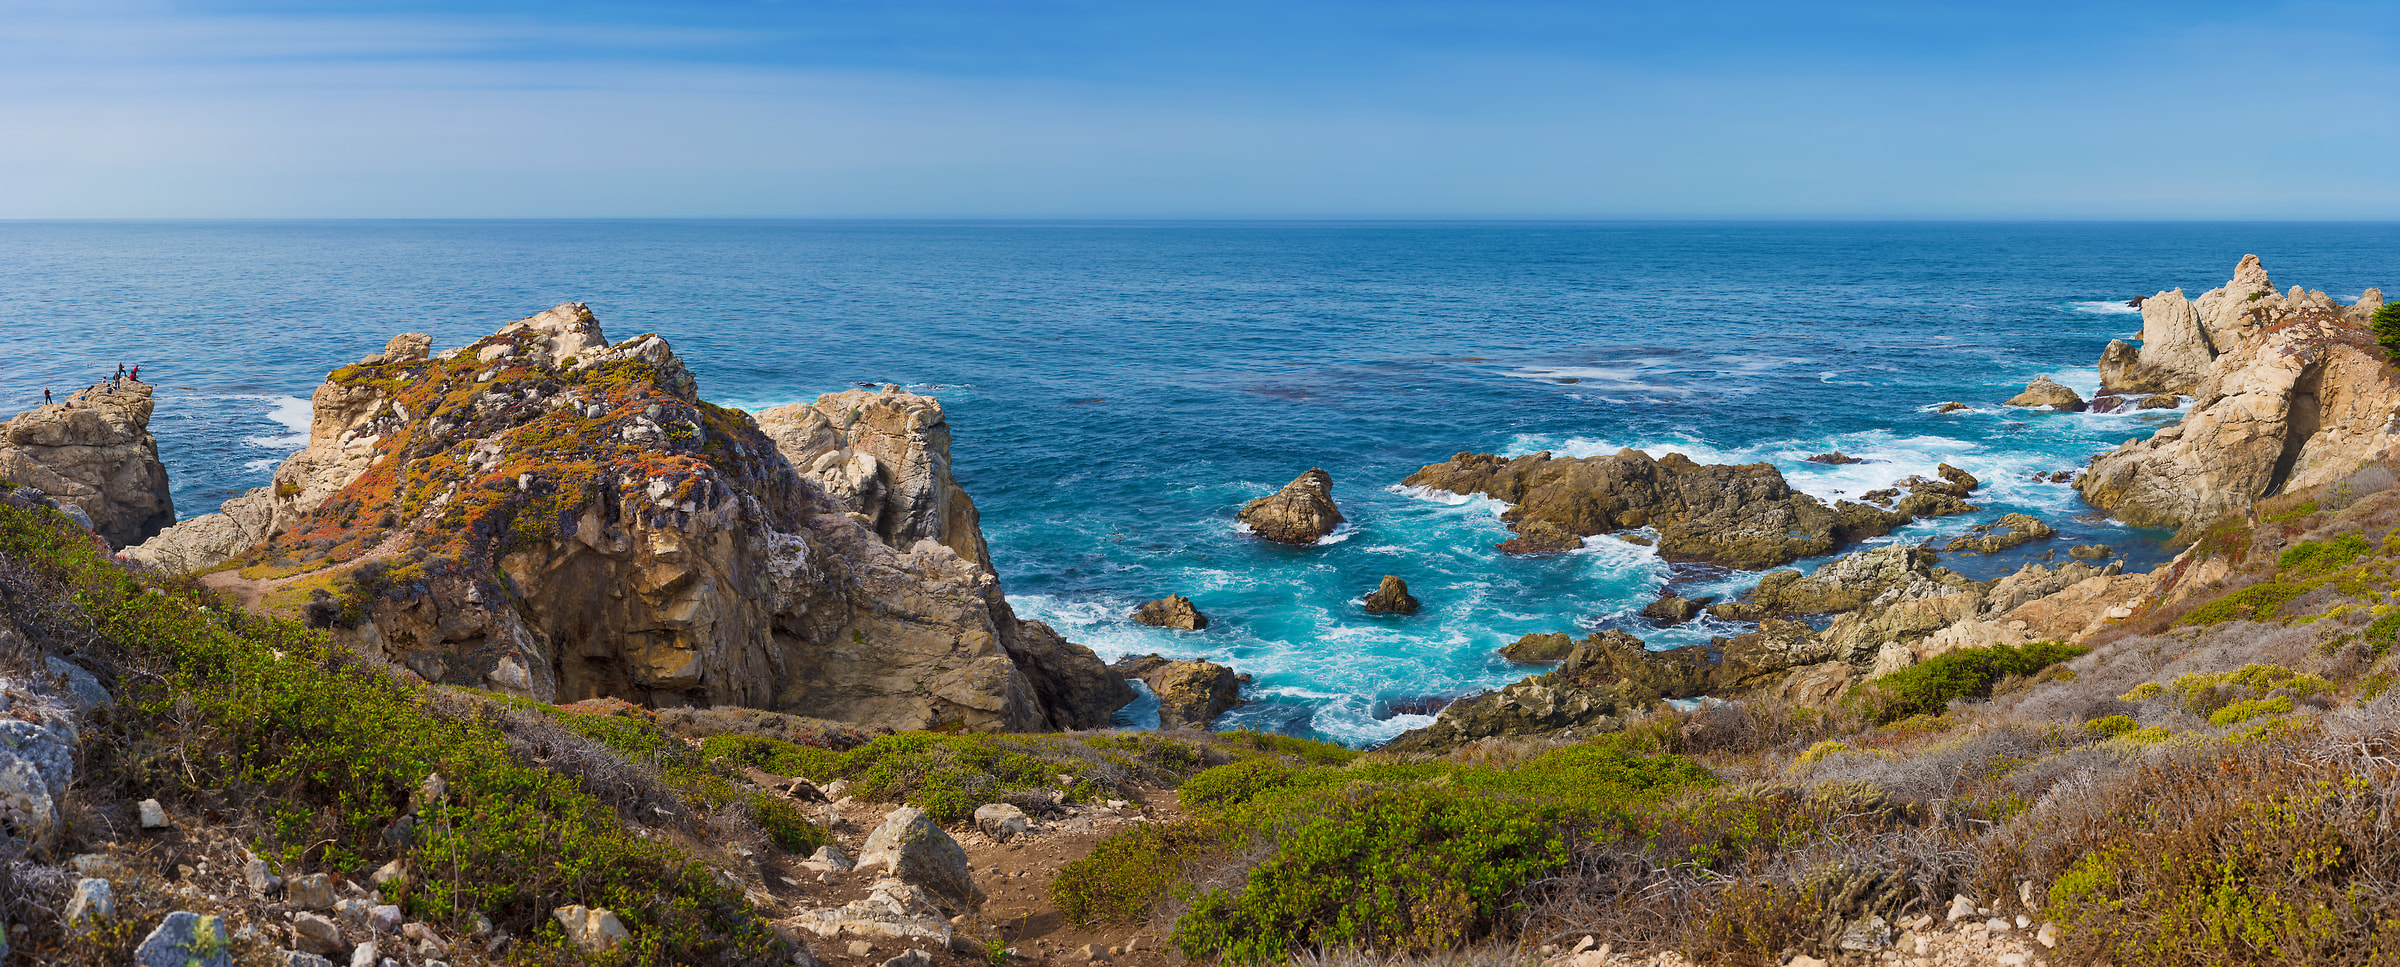 455 megapixels! A very high resolution, large-format VAST photo of an ocean coast; panorama photograph created by Jim Tarpo in Big Sur, California.